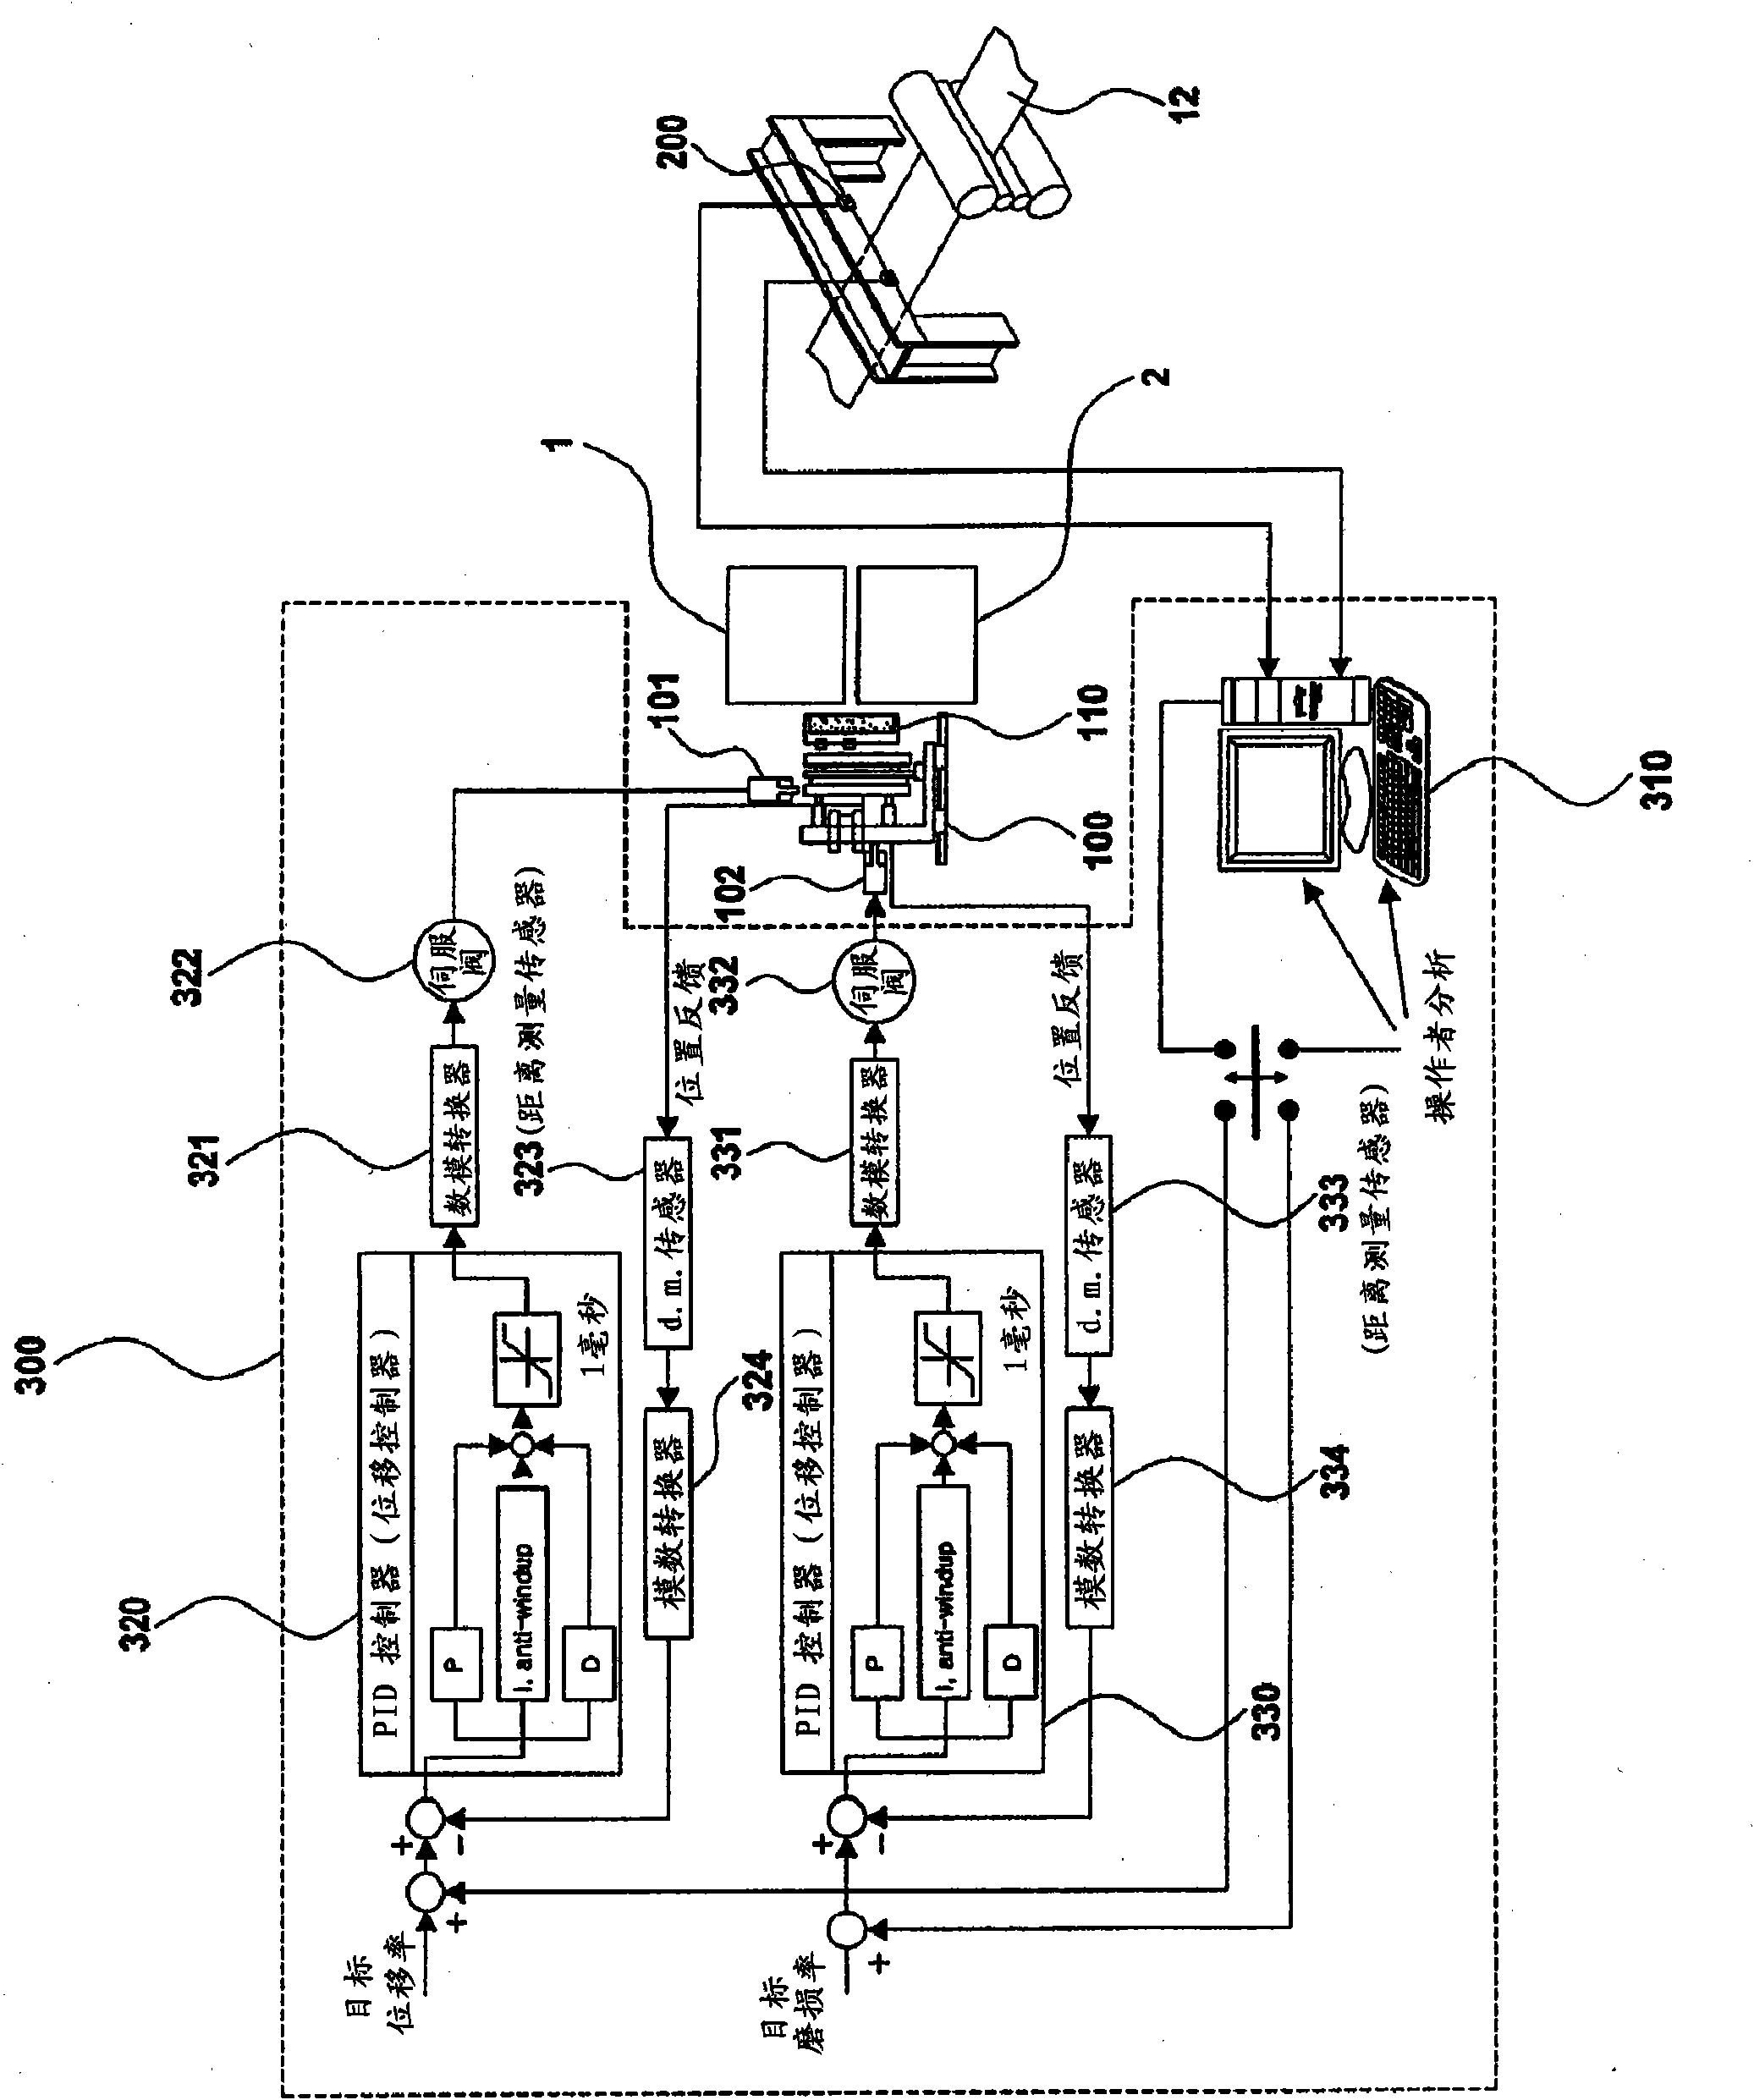 Strip edge shape control apparatus and method in strip casting process